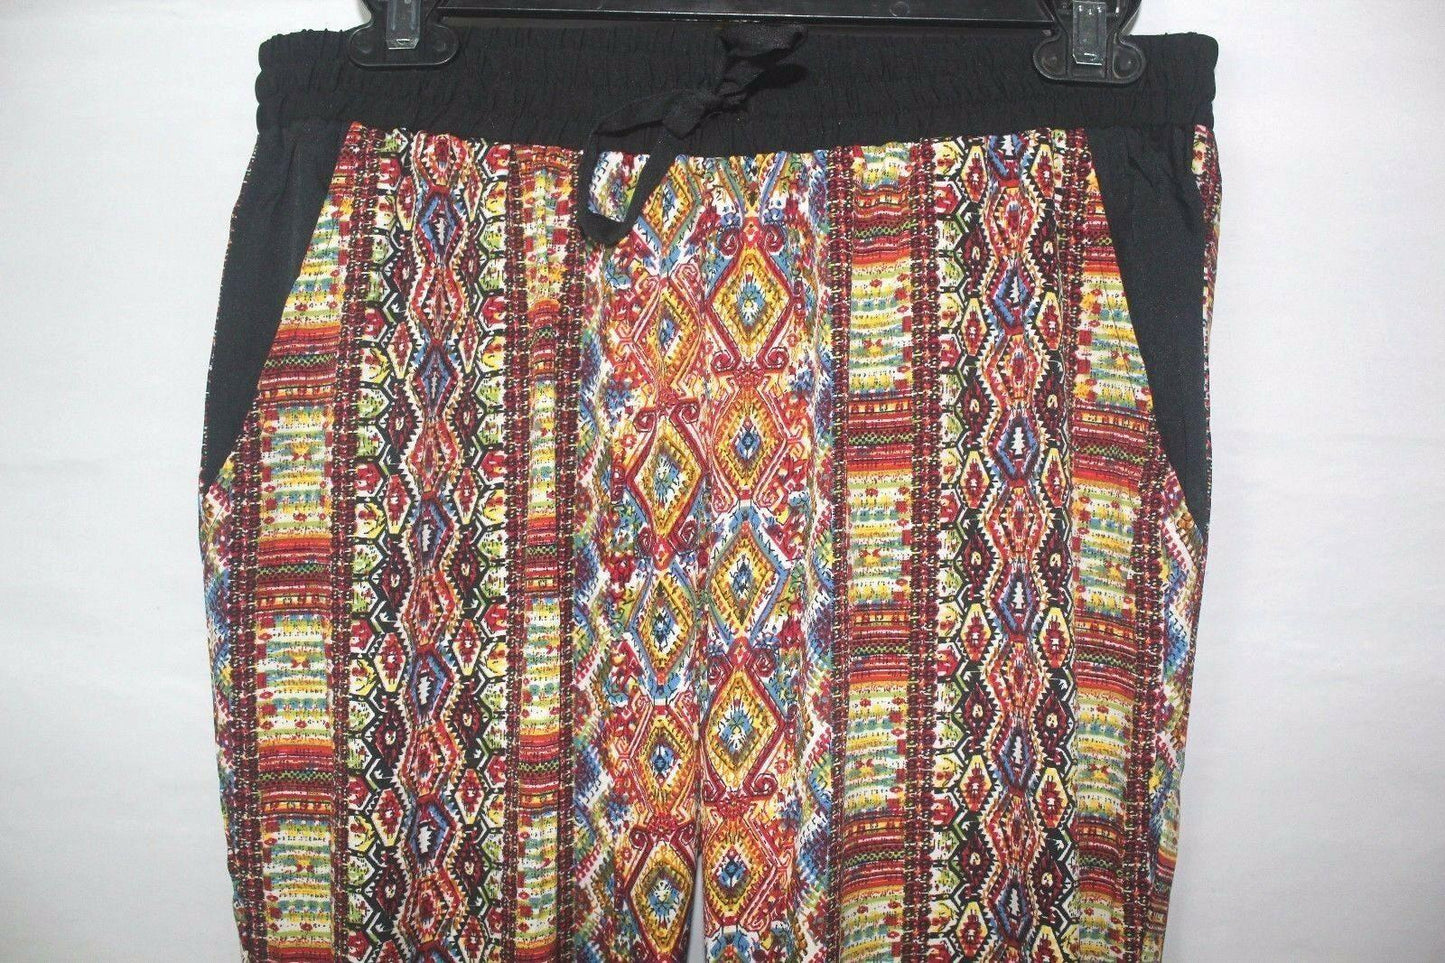 Walter By Walter Baker Pants Multicolor Geometric Print Size S - SVNYFancy